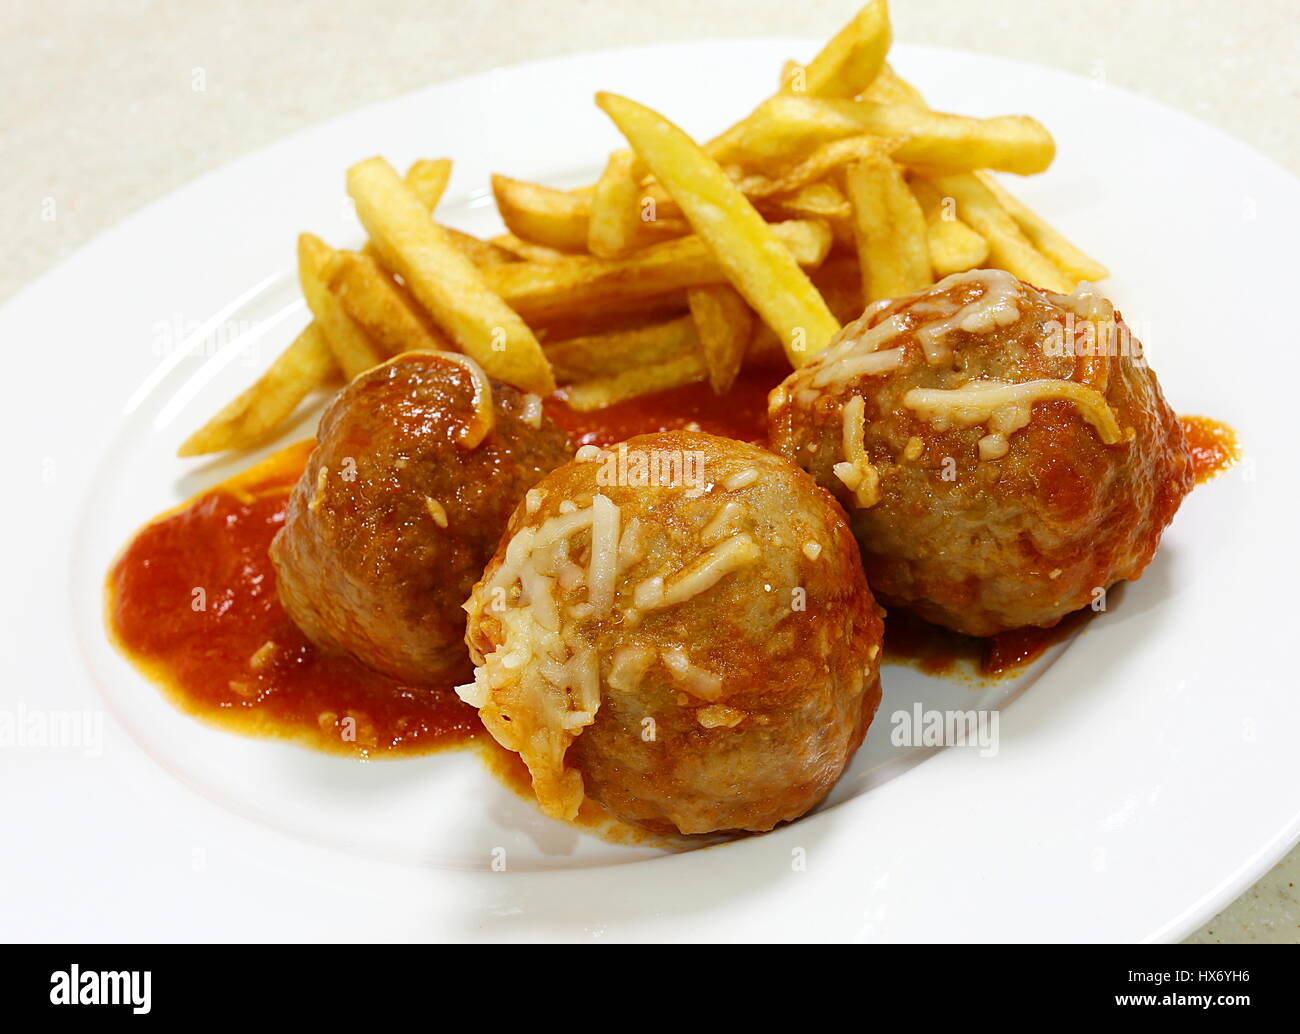 Meatballs with tomato sauce and french fried potato chips angled, Stock Photo